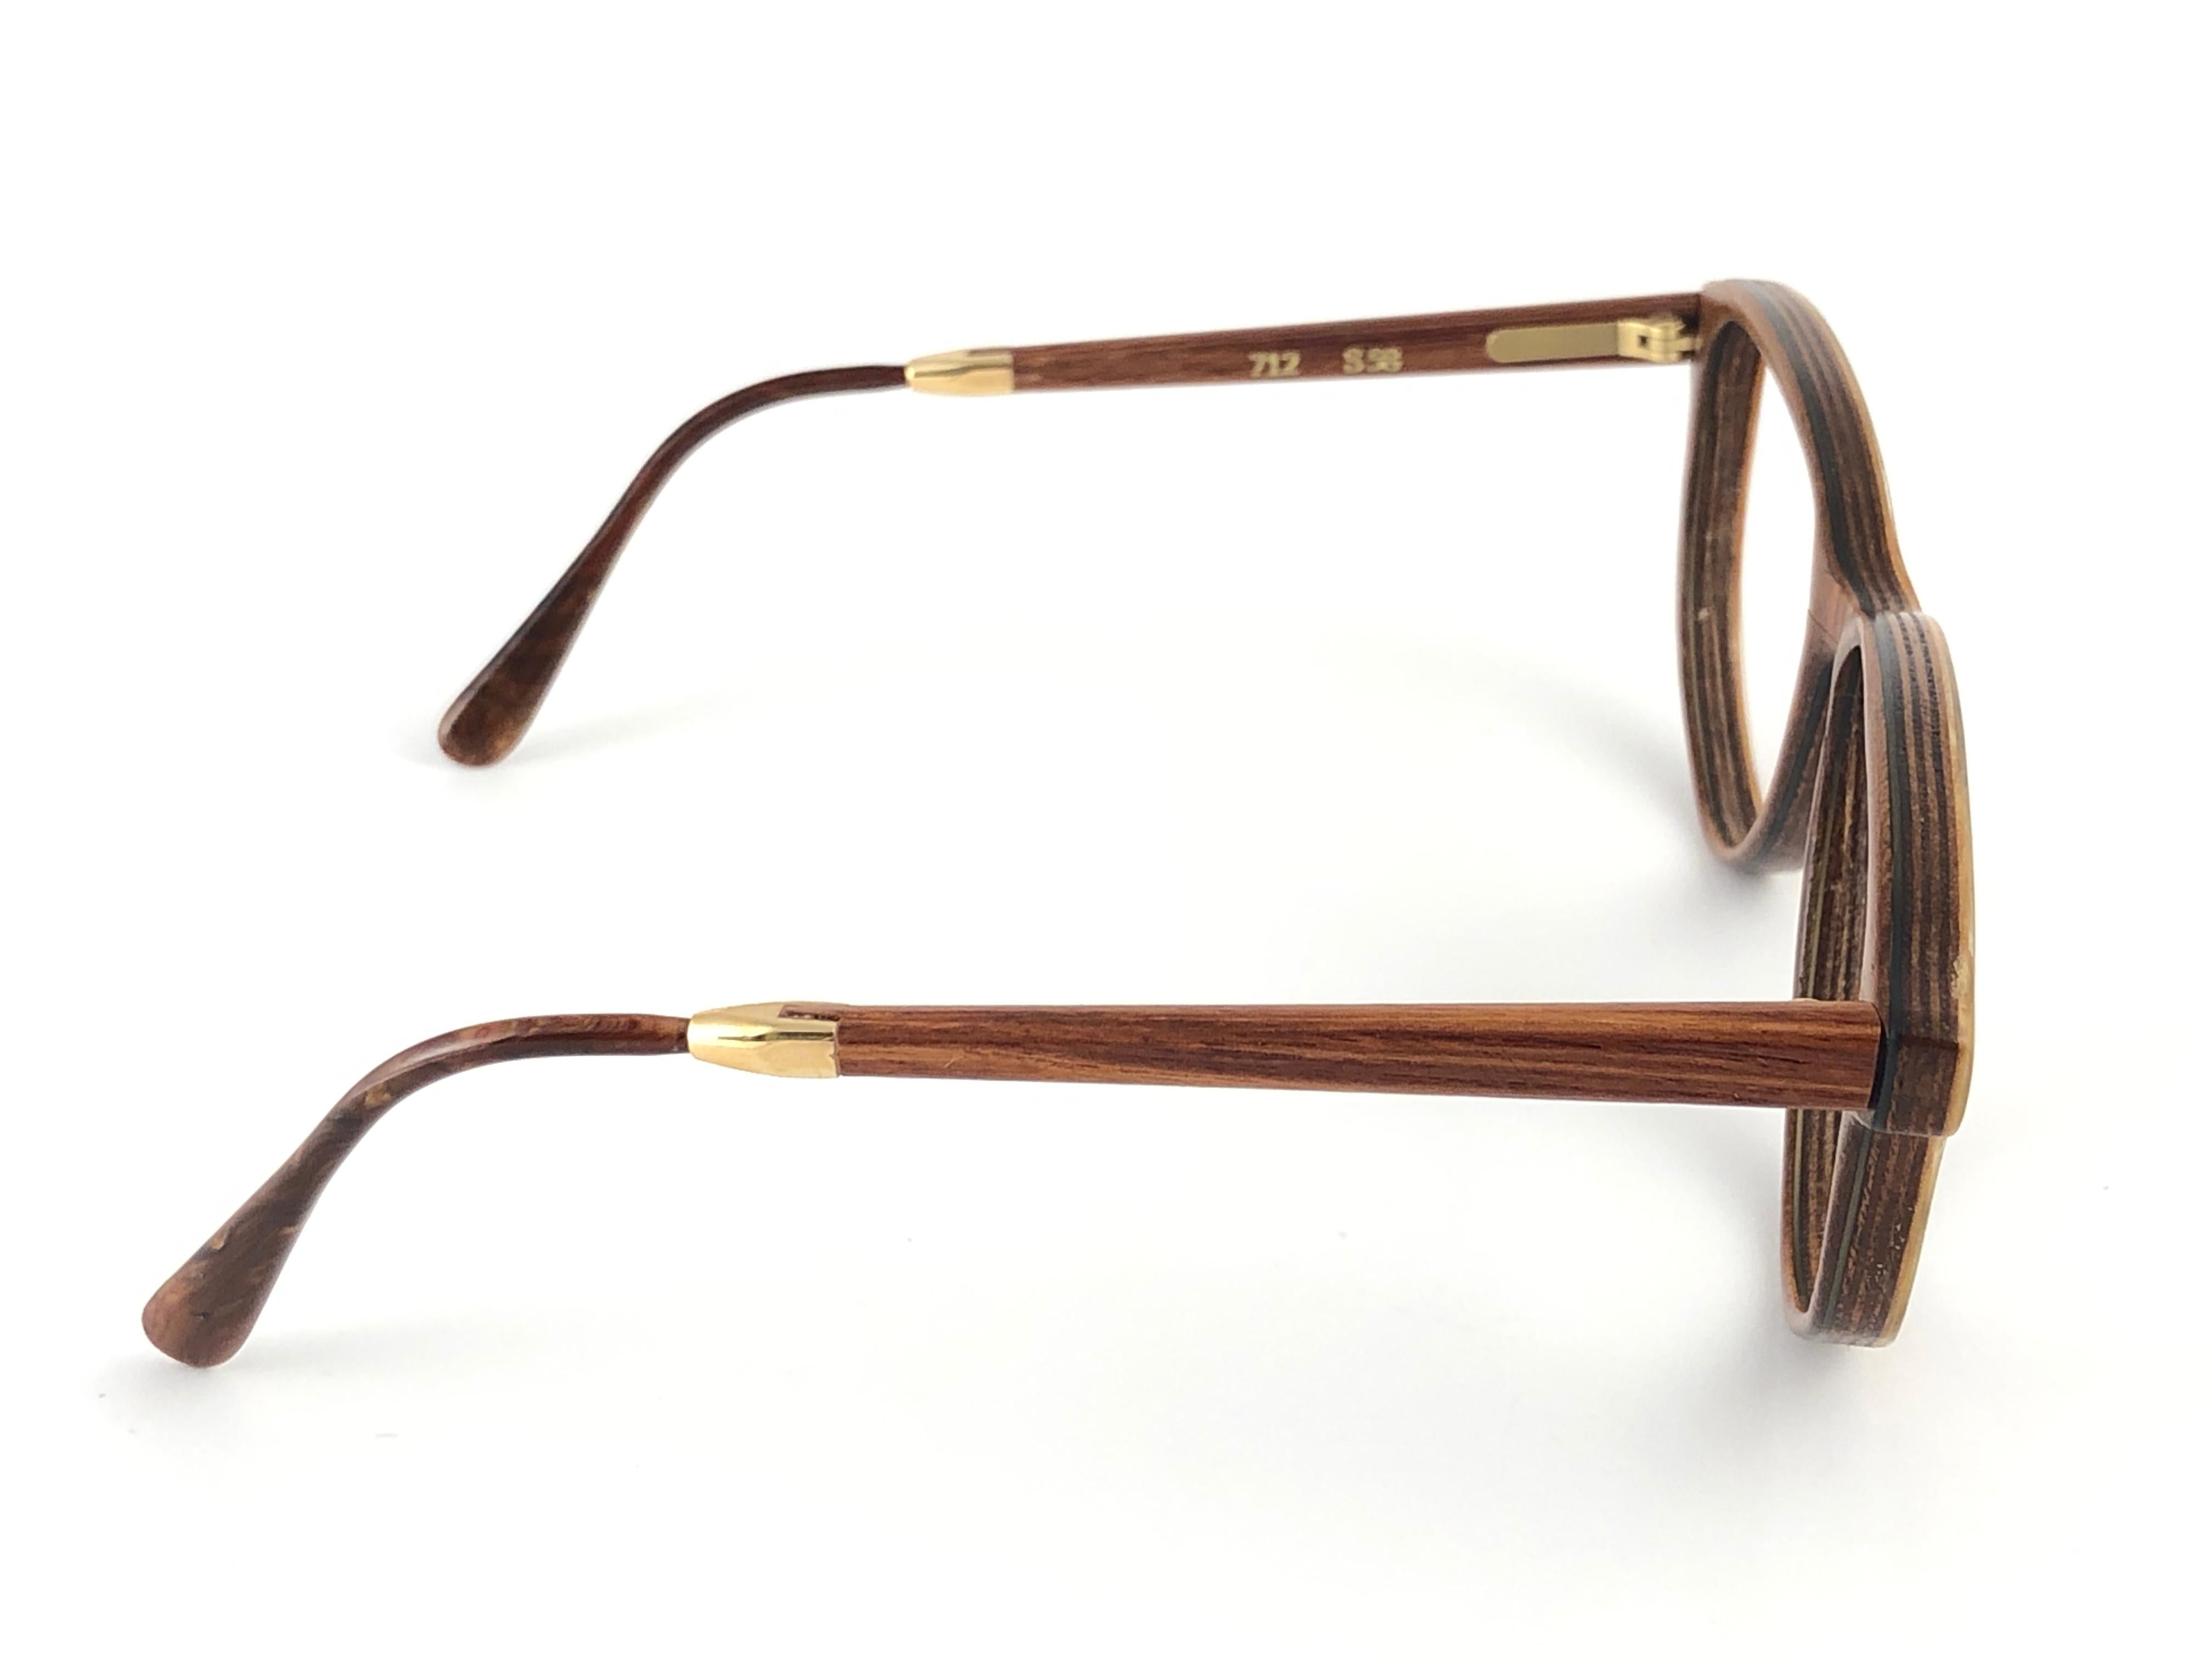 New Vintage Gold & Wood Paris genuine wood frame ready for prescription or reading lenses.
New, never worn or displayed. This pair may have minor sign of wear due to storage. 

Made in France.

Measurements

Frame Width  14 cms
Lens Height  4.2